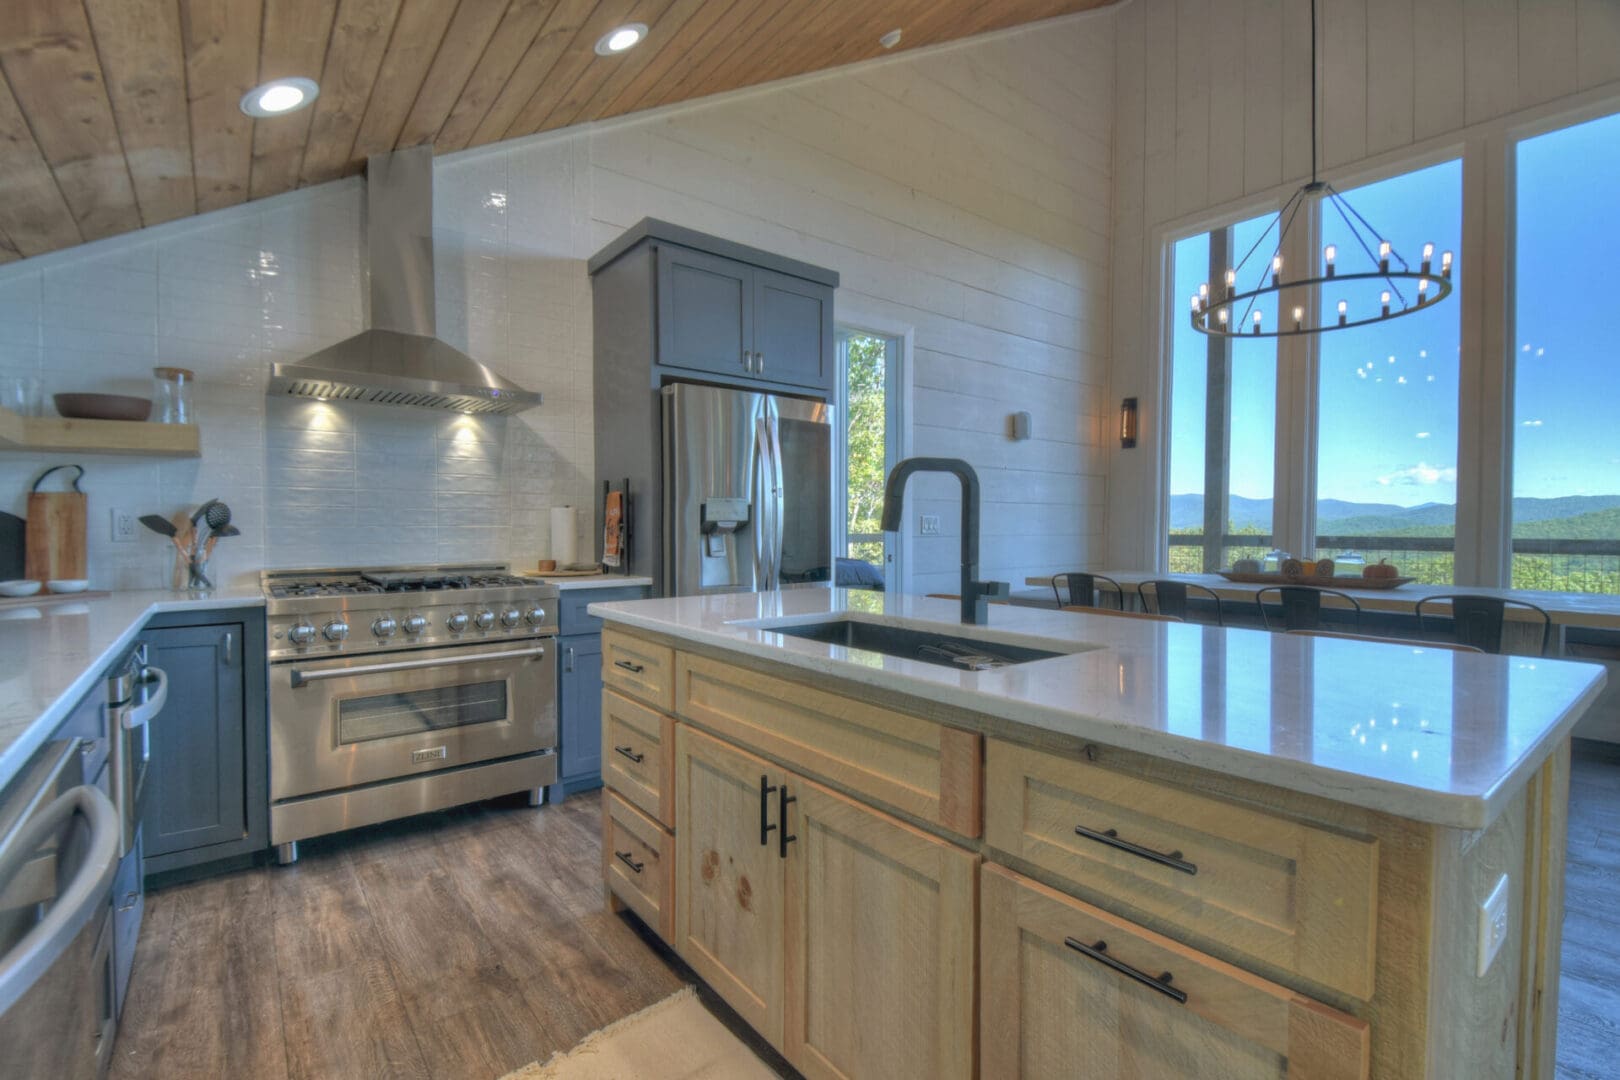 A kitchen with a wood ceiling and stainless steel appliances designed by Architectural Design services.